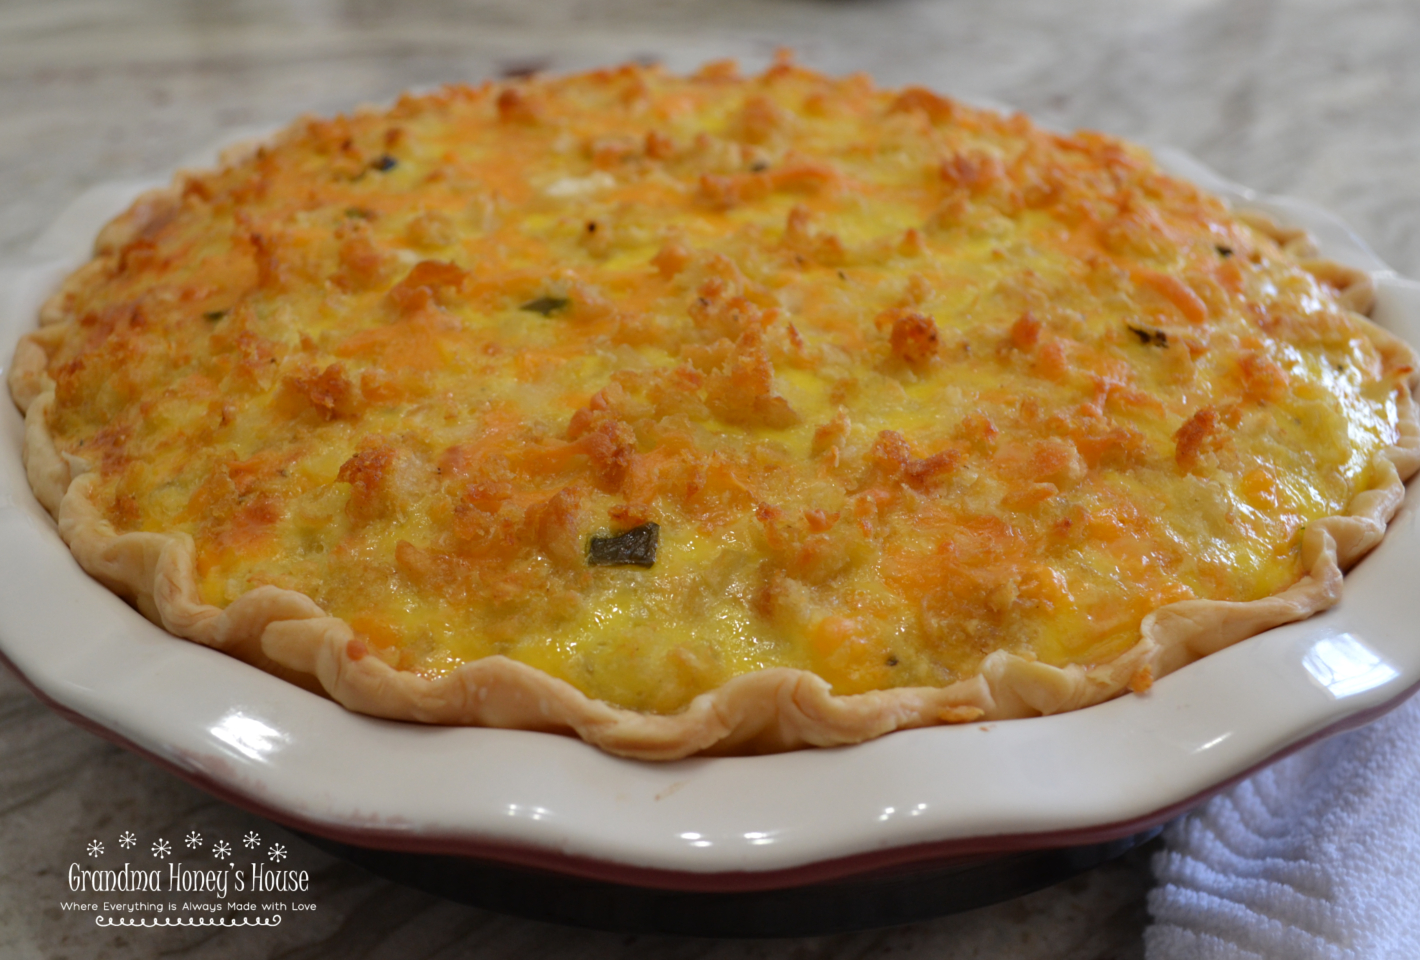 A loaded quiche with sausage, ham, peppers, spinach, cheese, eggs and half and half.  Top it off with a mixture of crumbled tater tots, cheddar cheese, and diced jalapenos for a  special brunch dish